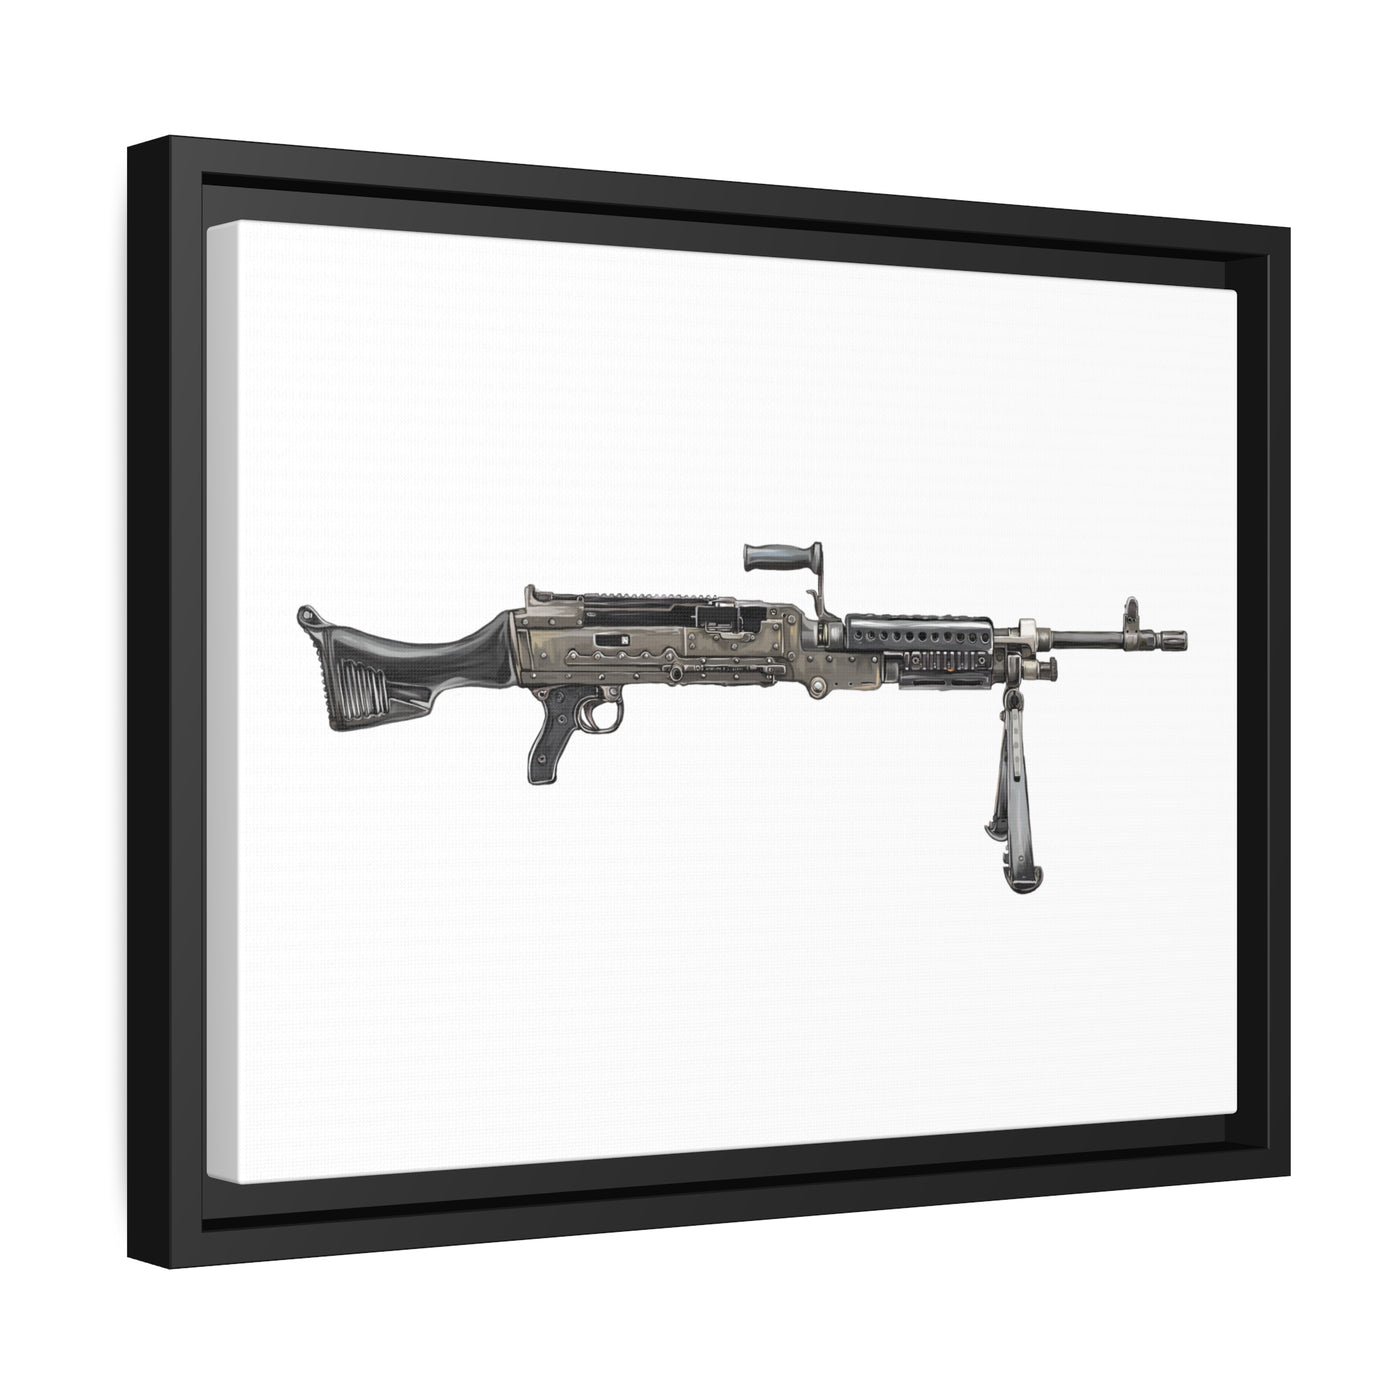 M240B - Belt Fed 7.62x51 Machine Gun - Just The Piece - Black Framed Wrapped Canvas - Value Collection